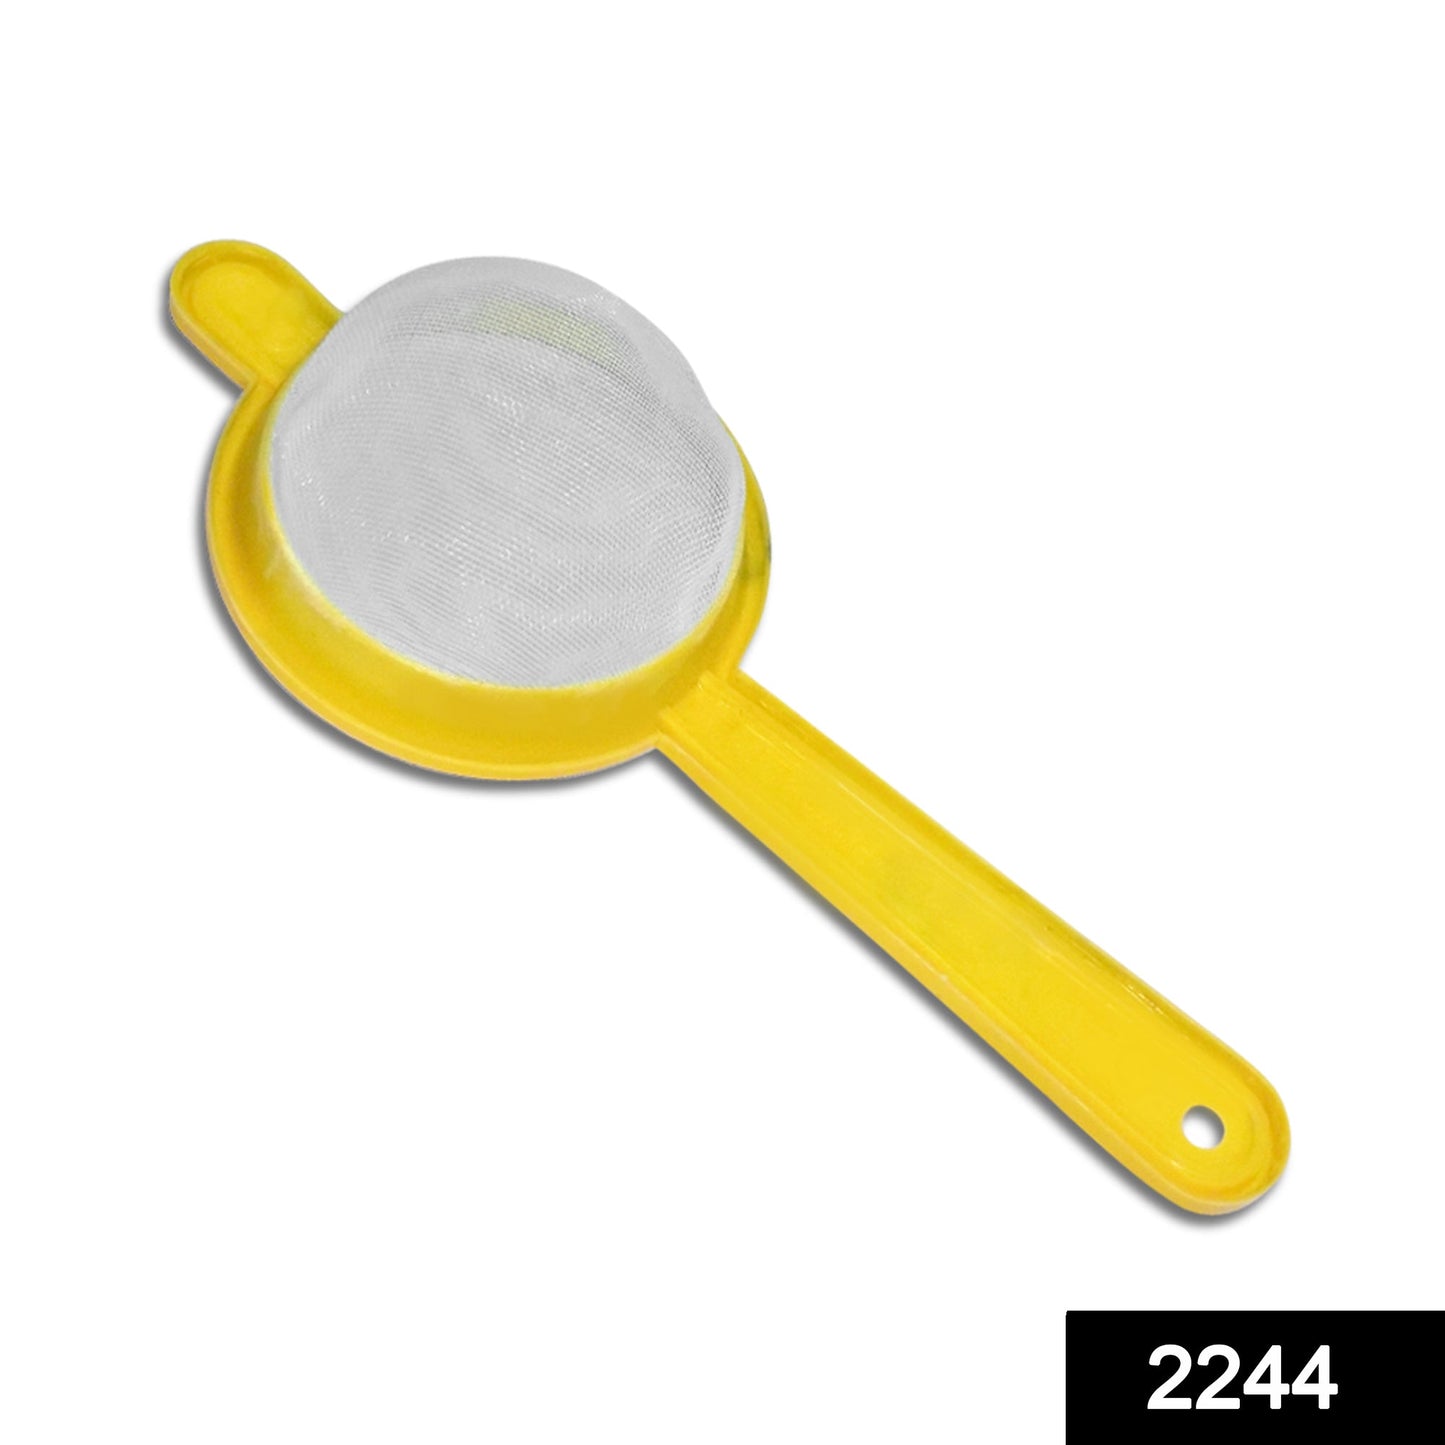 2244 Tea and Coffee Strainers (Multicolour) JK Trends